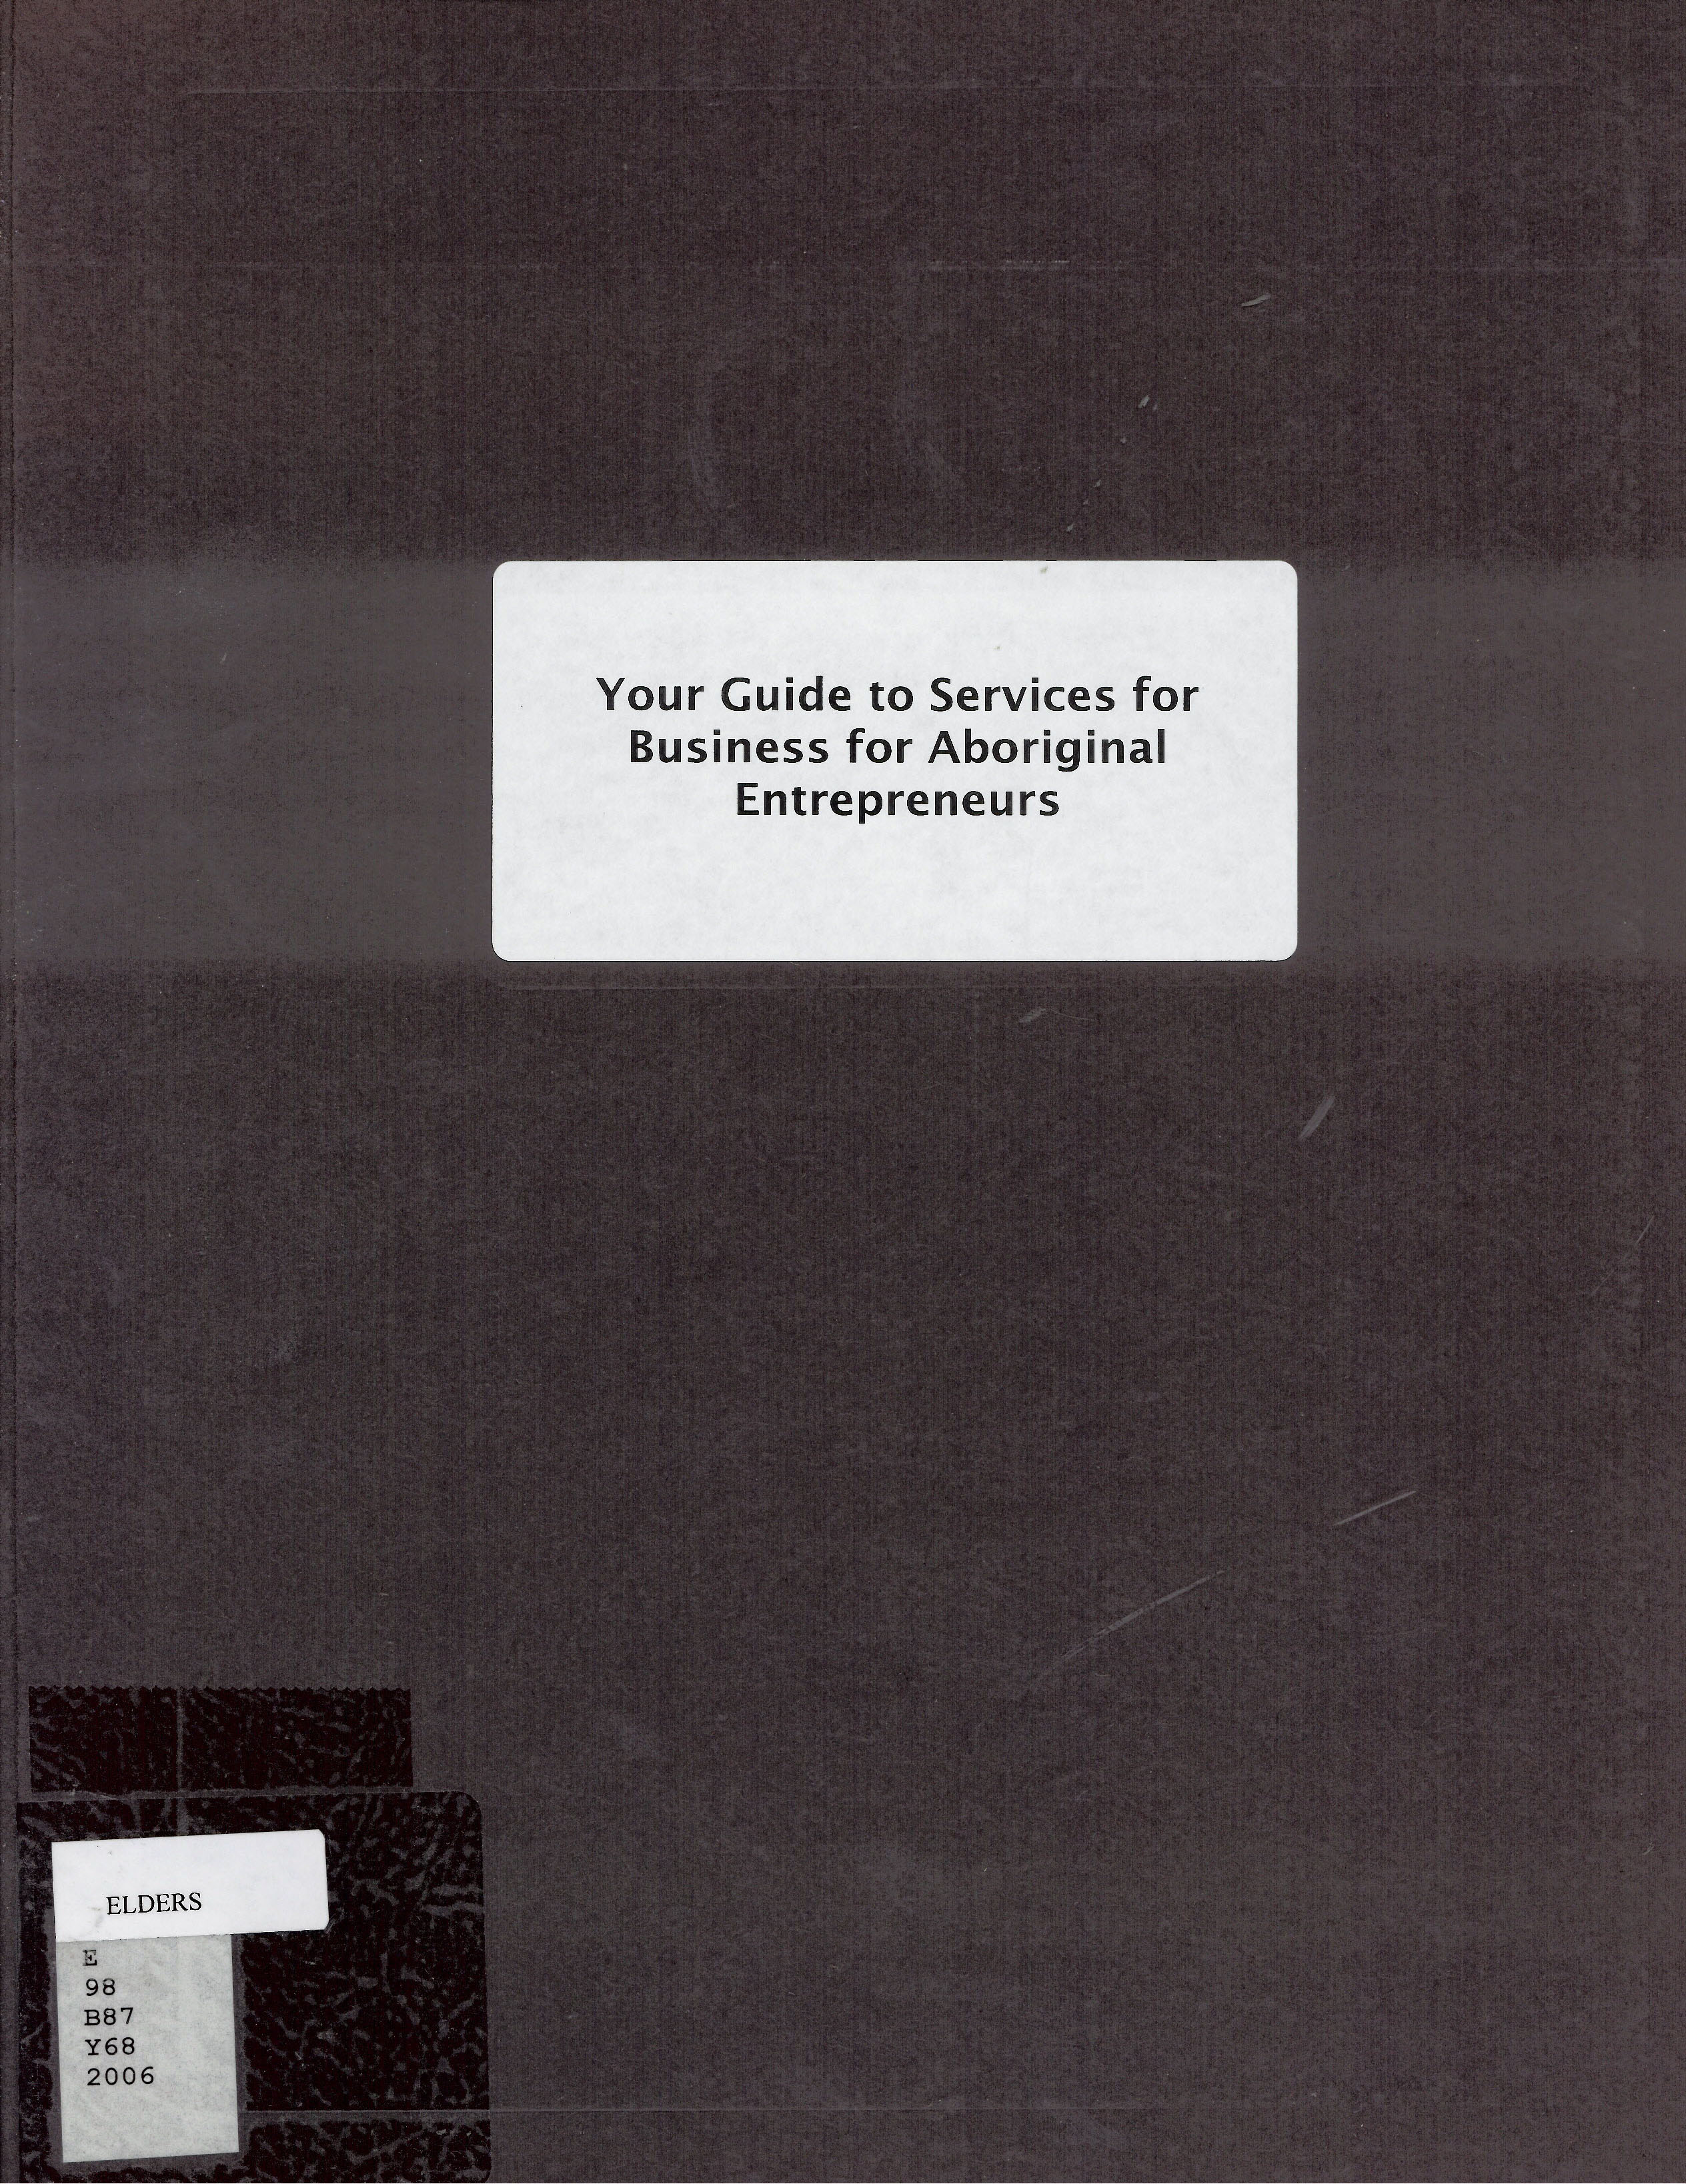 Your guide to services for business for Aboriginal entrepreneurs.